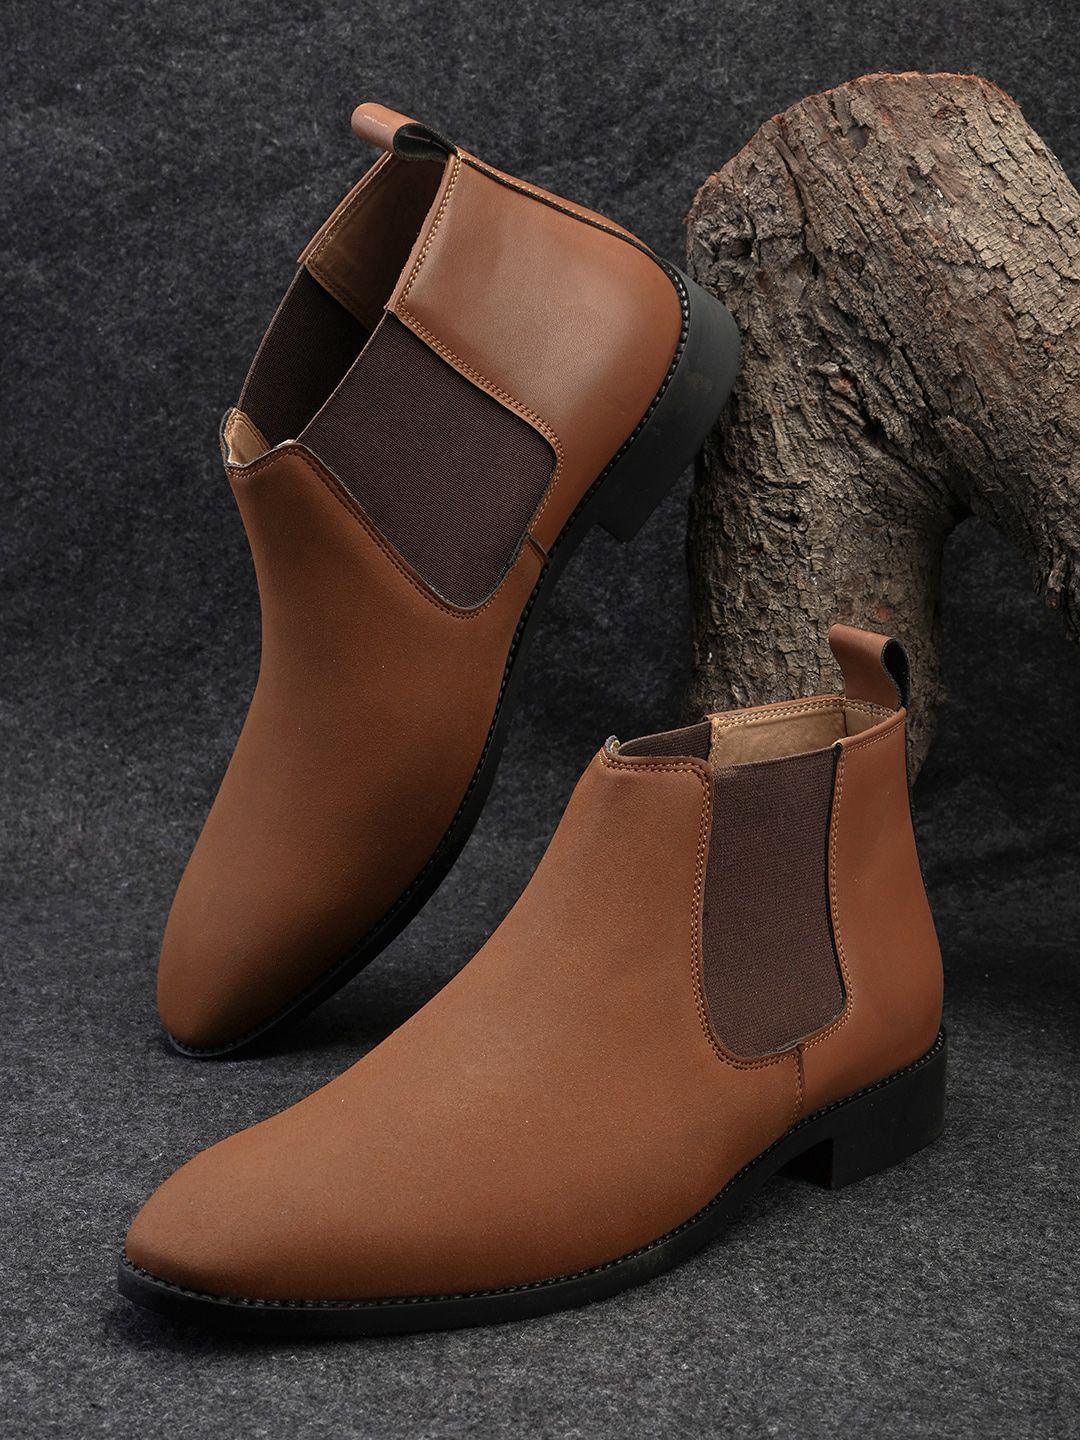 the roadster lifestyle co men slip-on mid-top chelsea boots